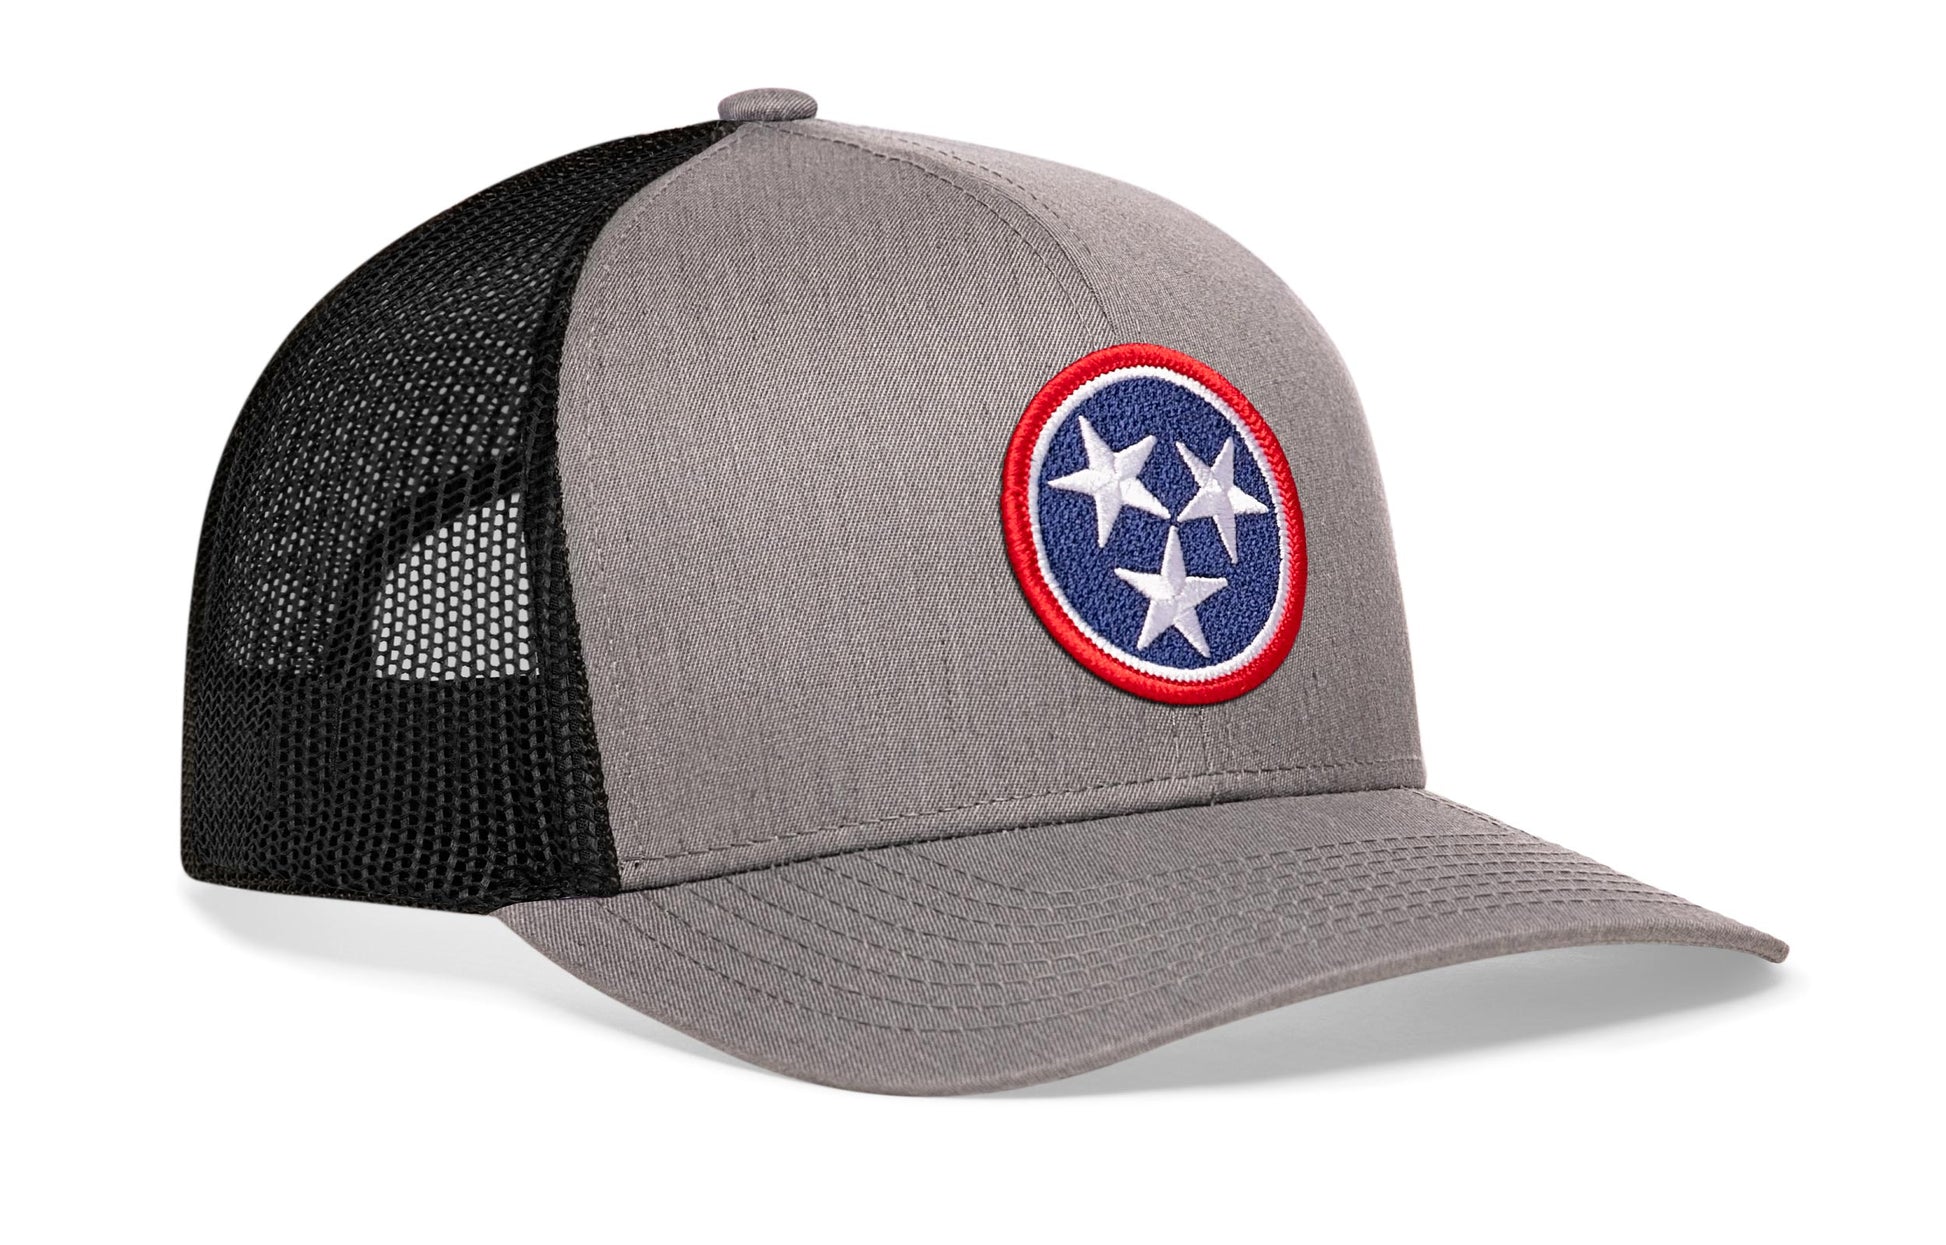 Tennessee - State Flag Hats Grey & White Trucker